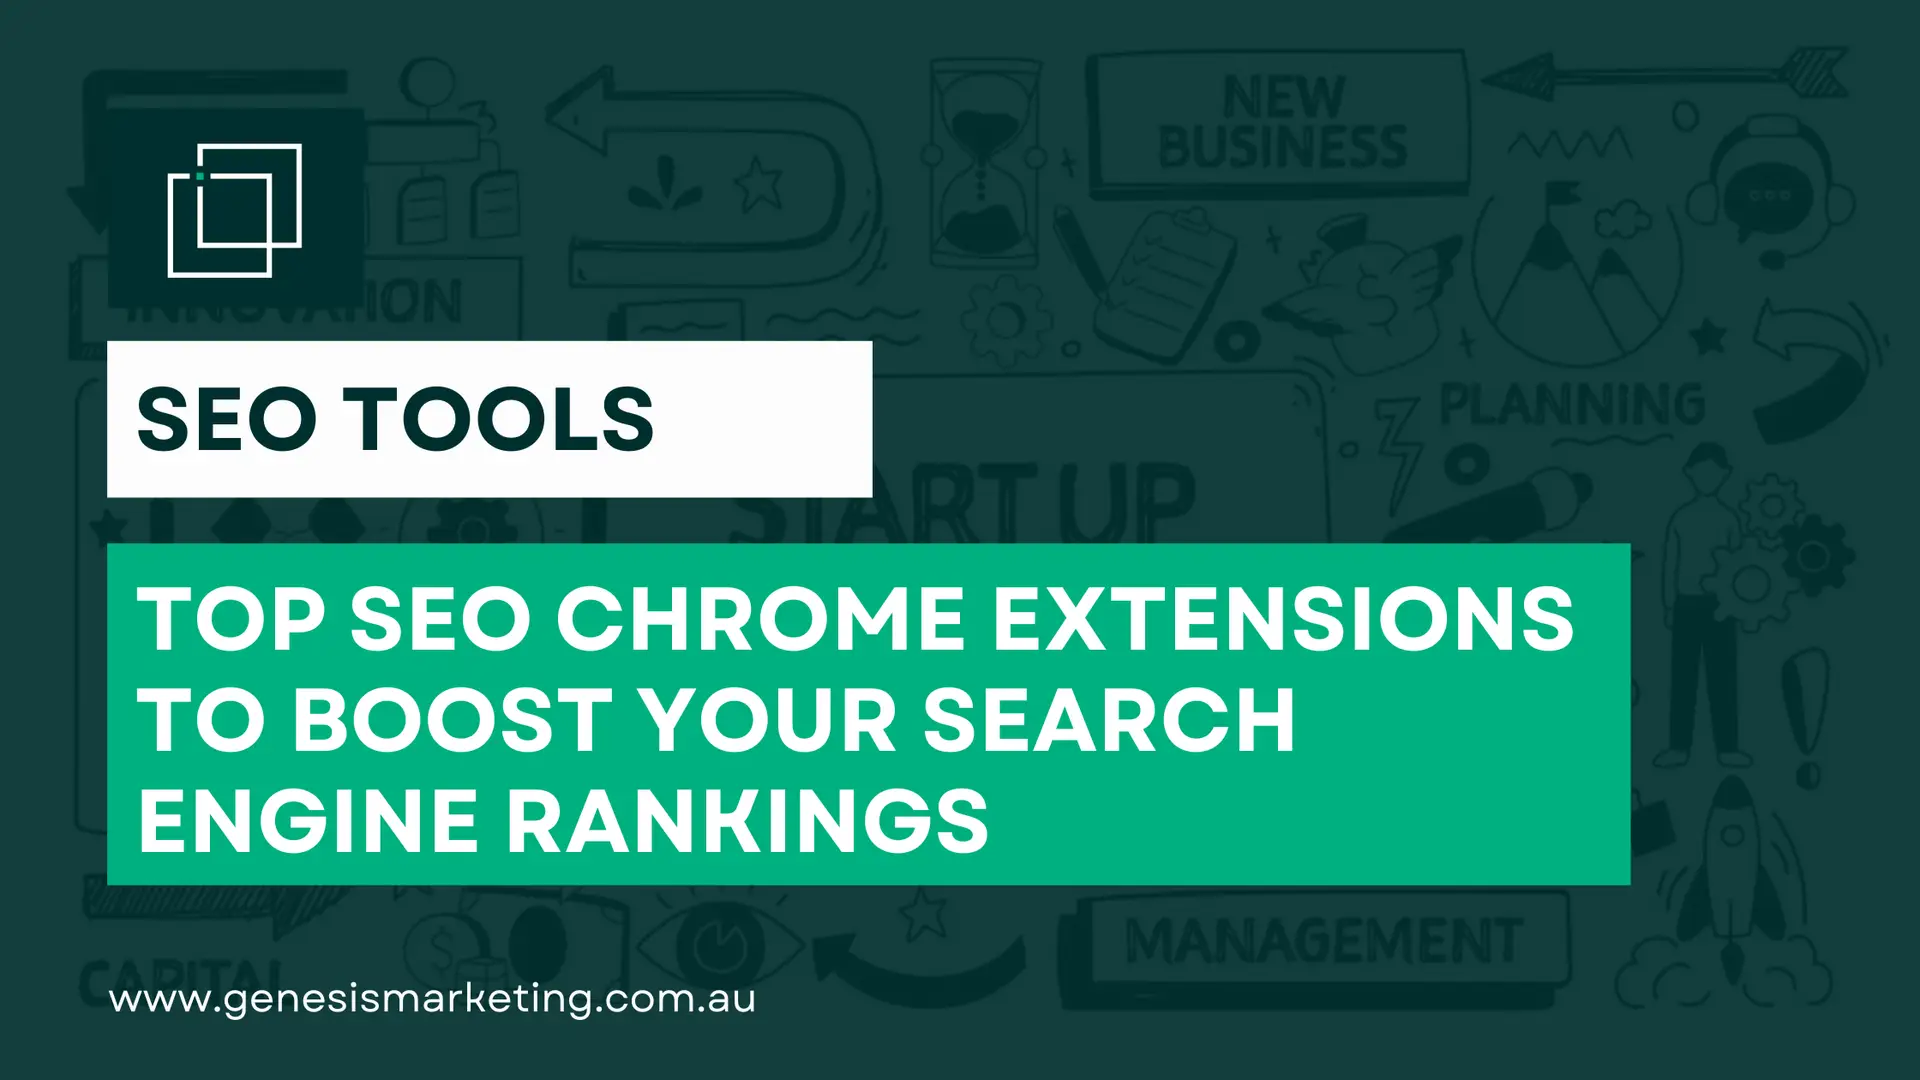 Top SEO Chrome Extensions to Boost Your Search Engine Rankings